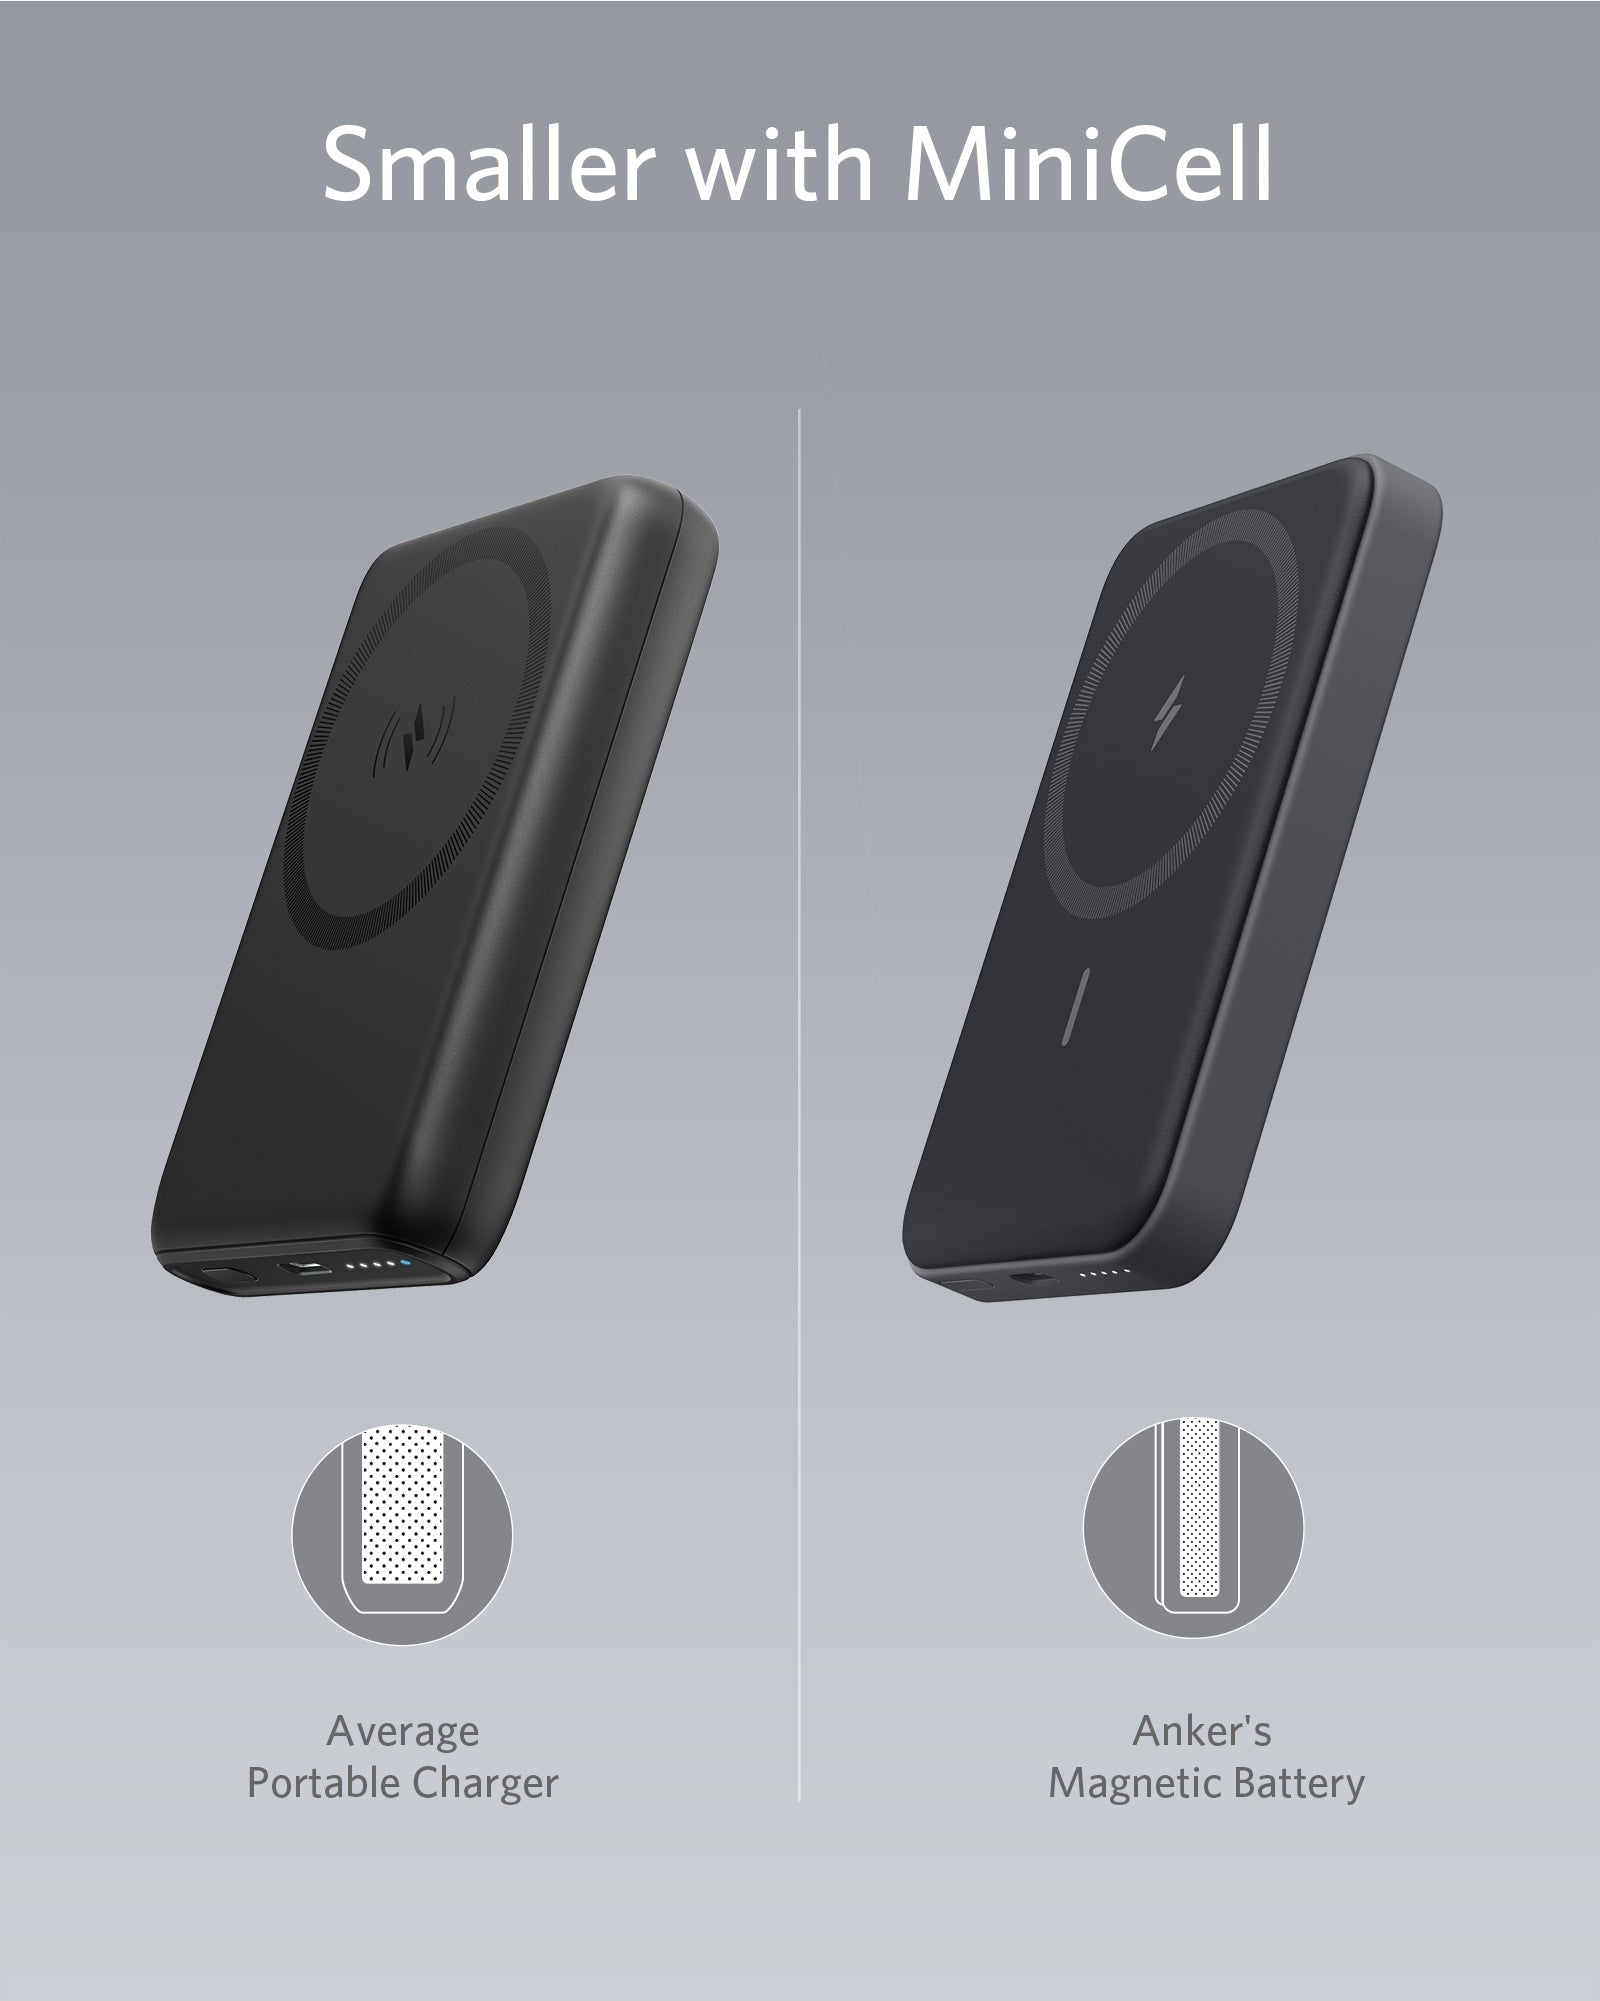 Anker improves MagGo iPhone battery pack with better USB-C location